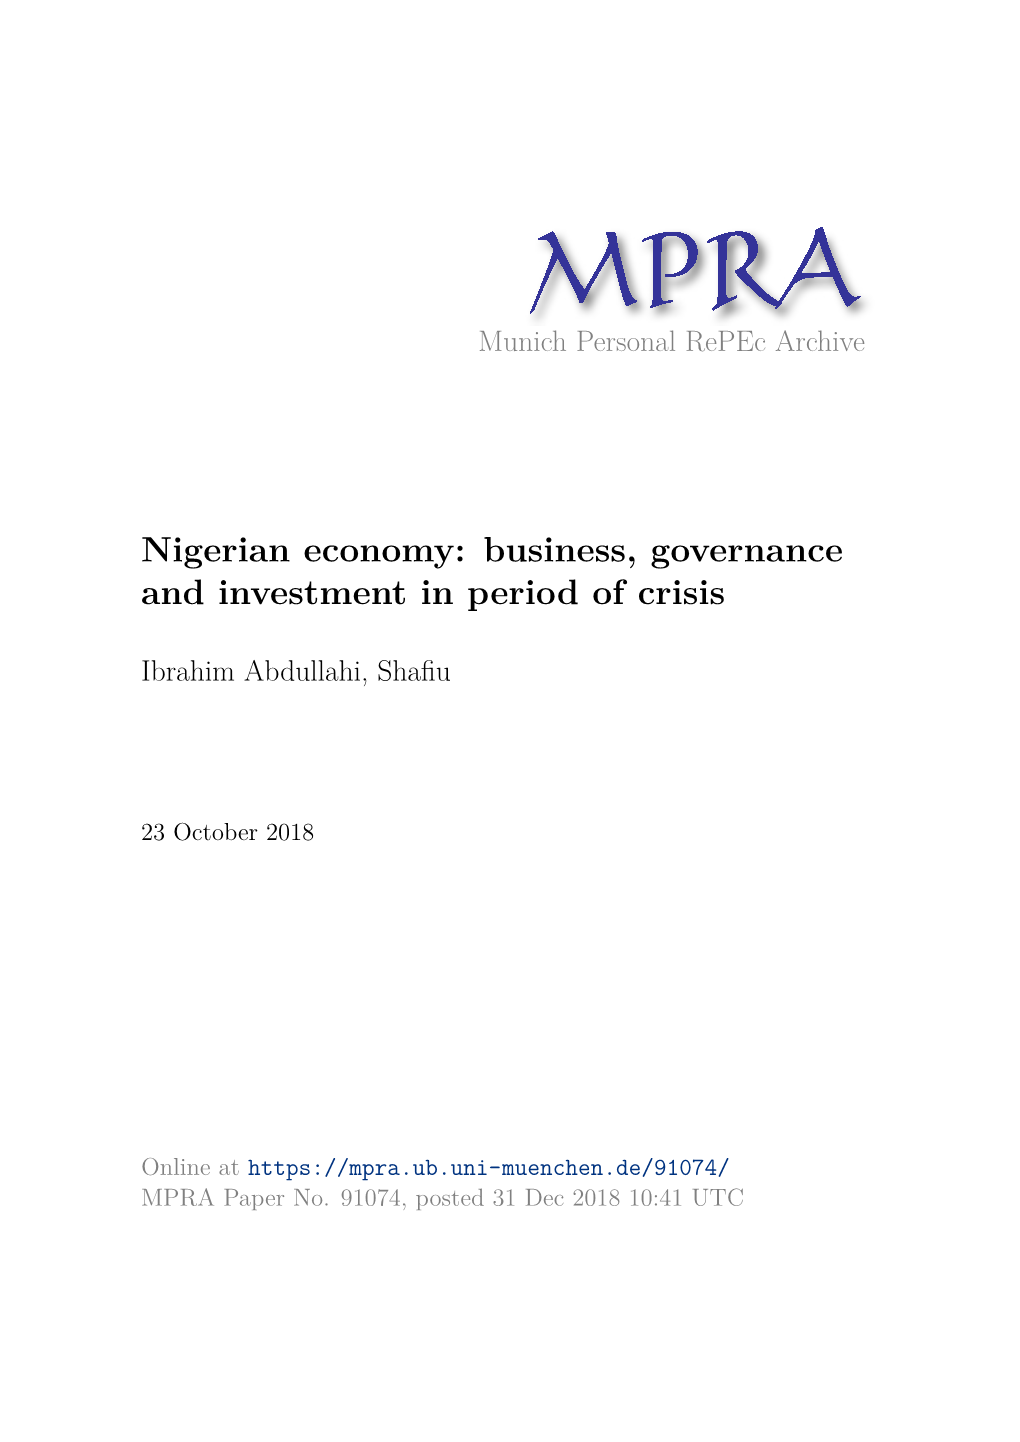 Nigerian Economy: Business, Governance and Investment in Period of Crisis